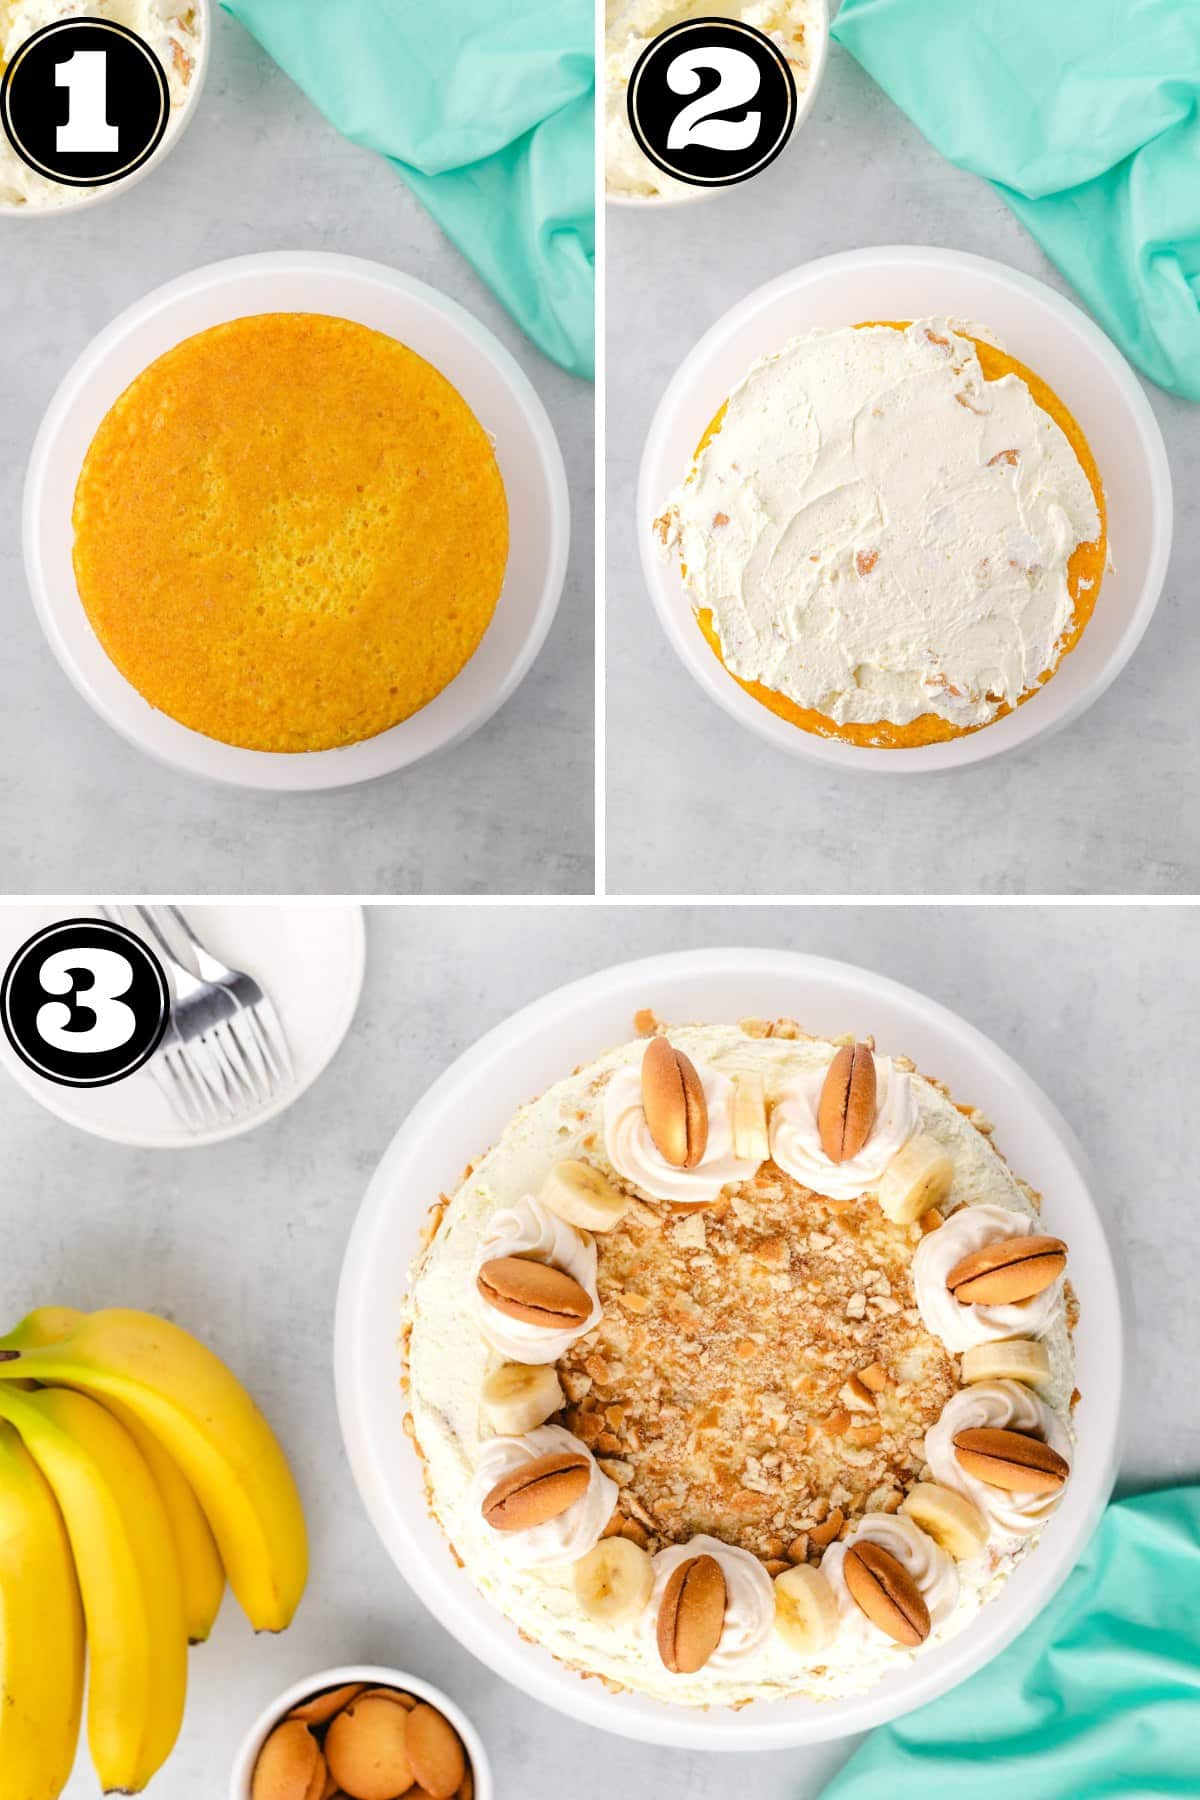 Collage image showing steps to ice and decorate banana pudding cake.